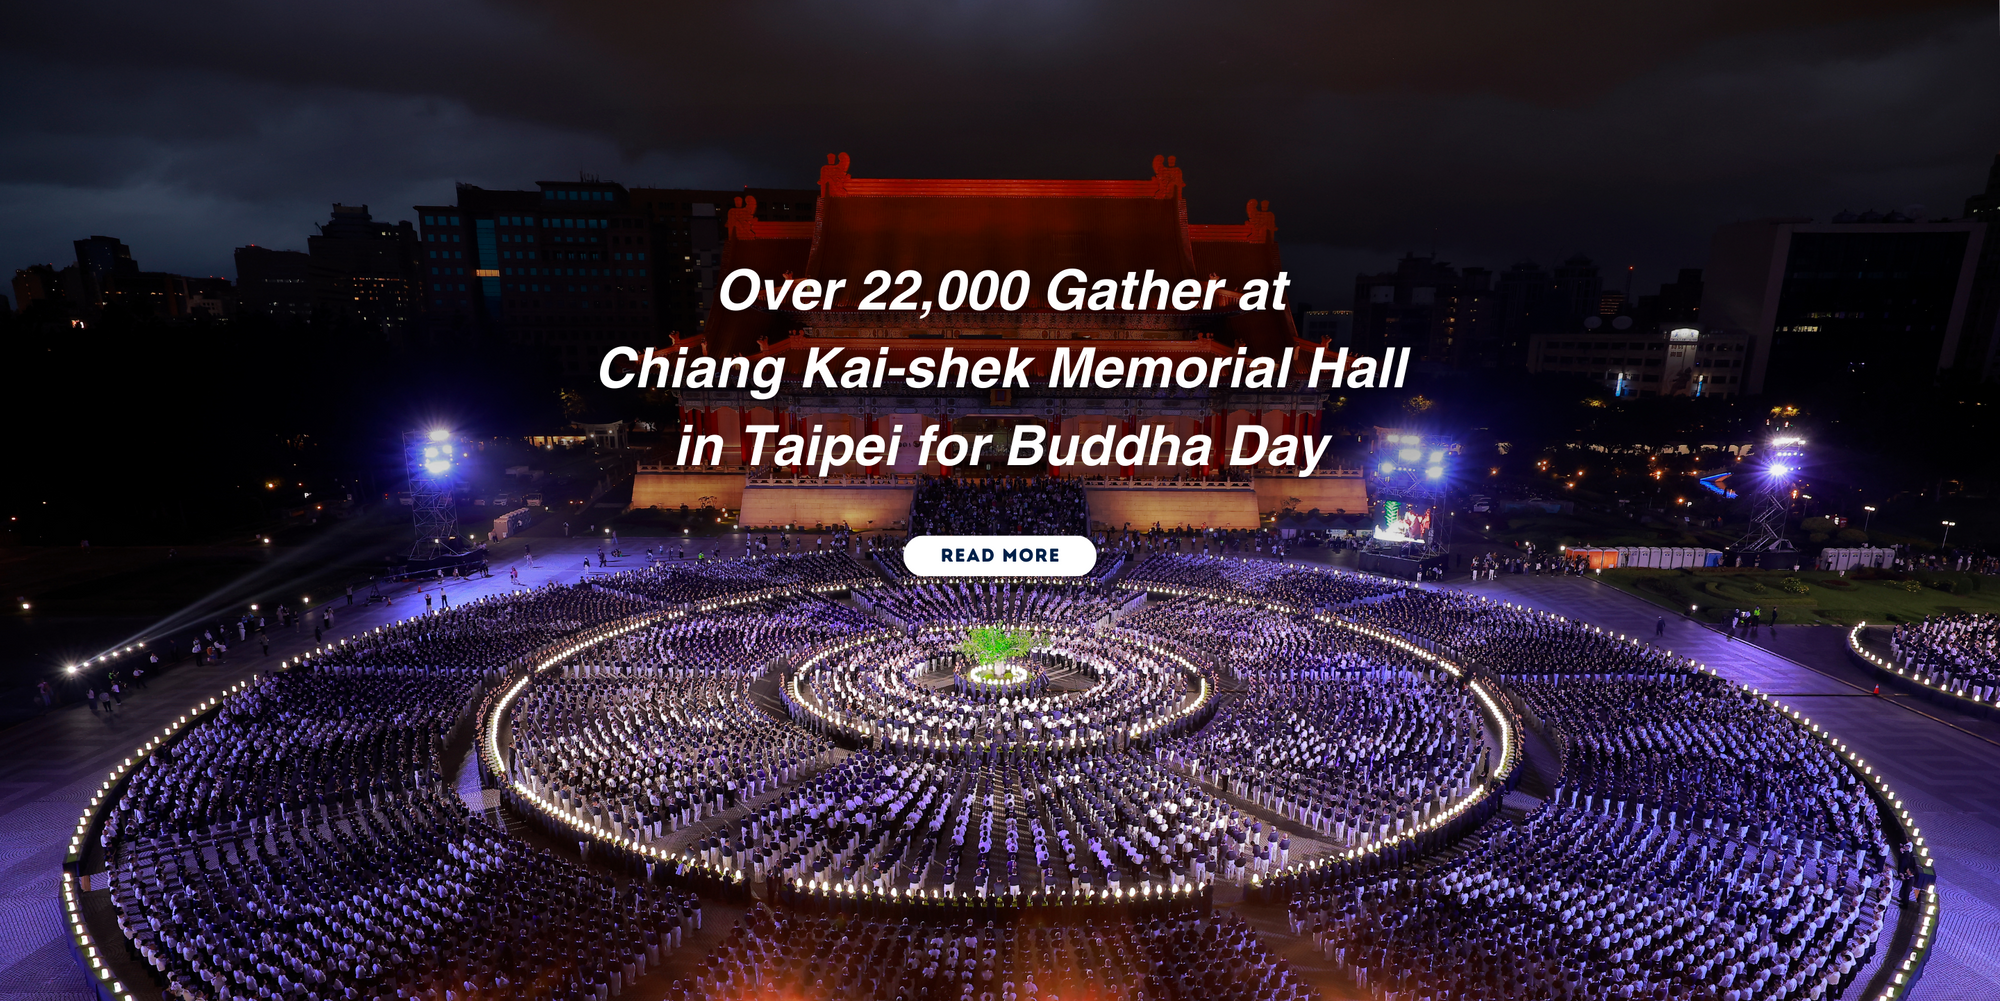 Over 22,000 Gather at Chiang Kai-shek Memorial Hall in Taipei for Buddha Day